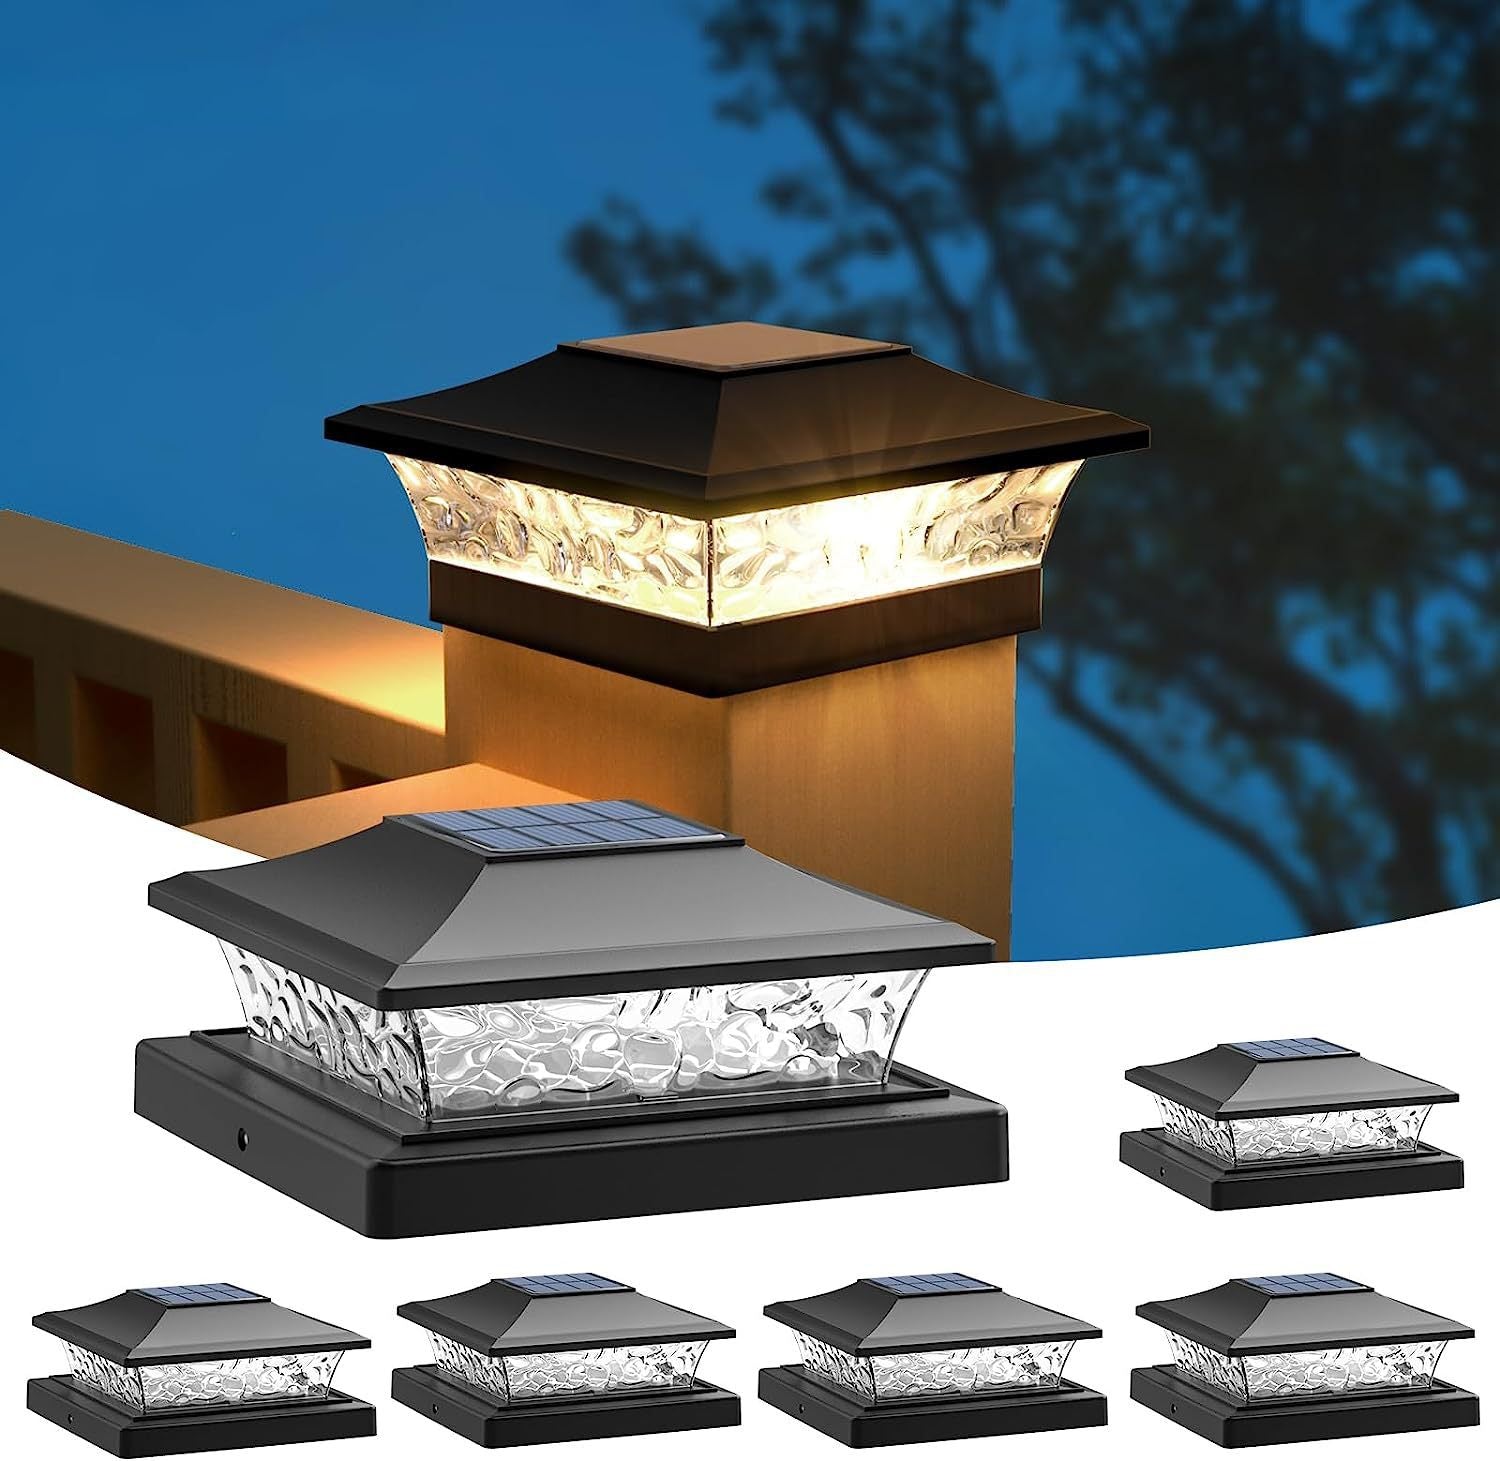 Solar Post Lights Outdoor LED Lighting Solar Deck Cap Lights Two Light Modes Suitable for 3.5-5.5 Wooden Posts